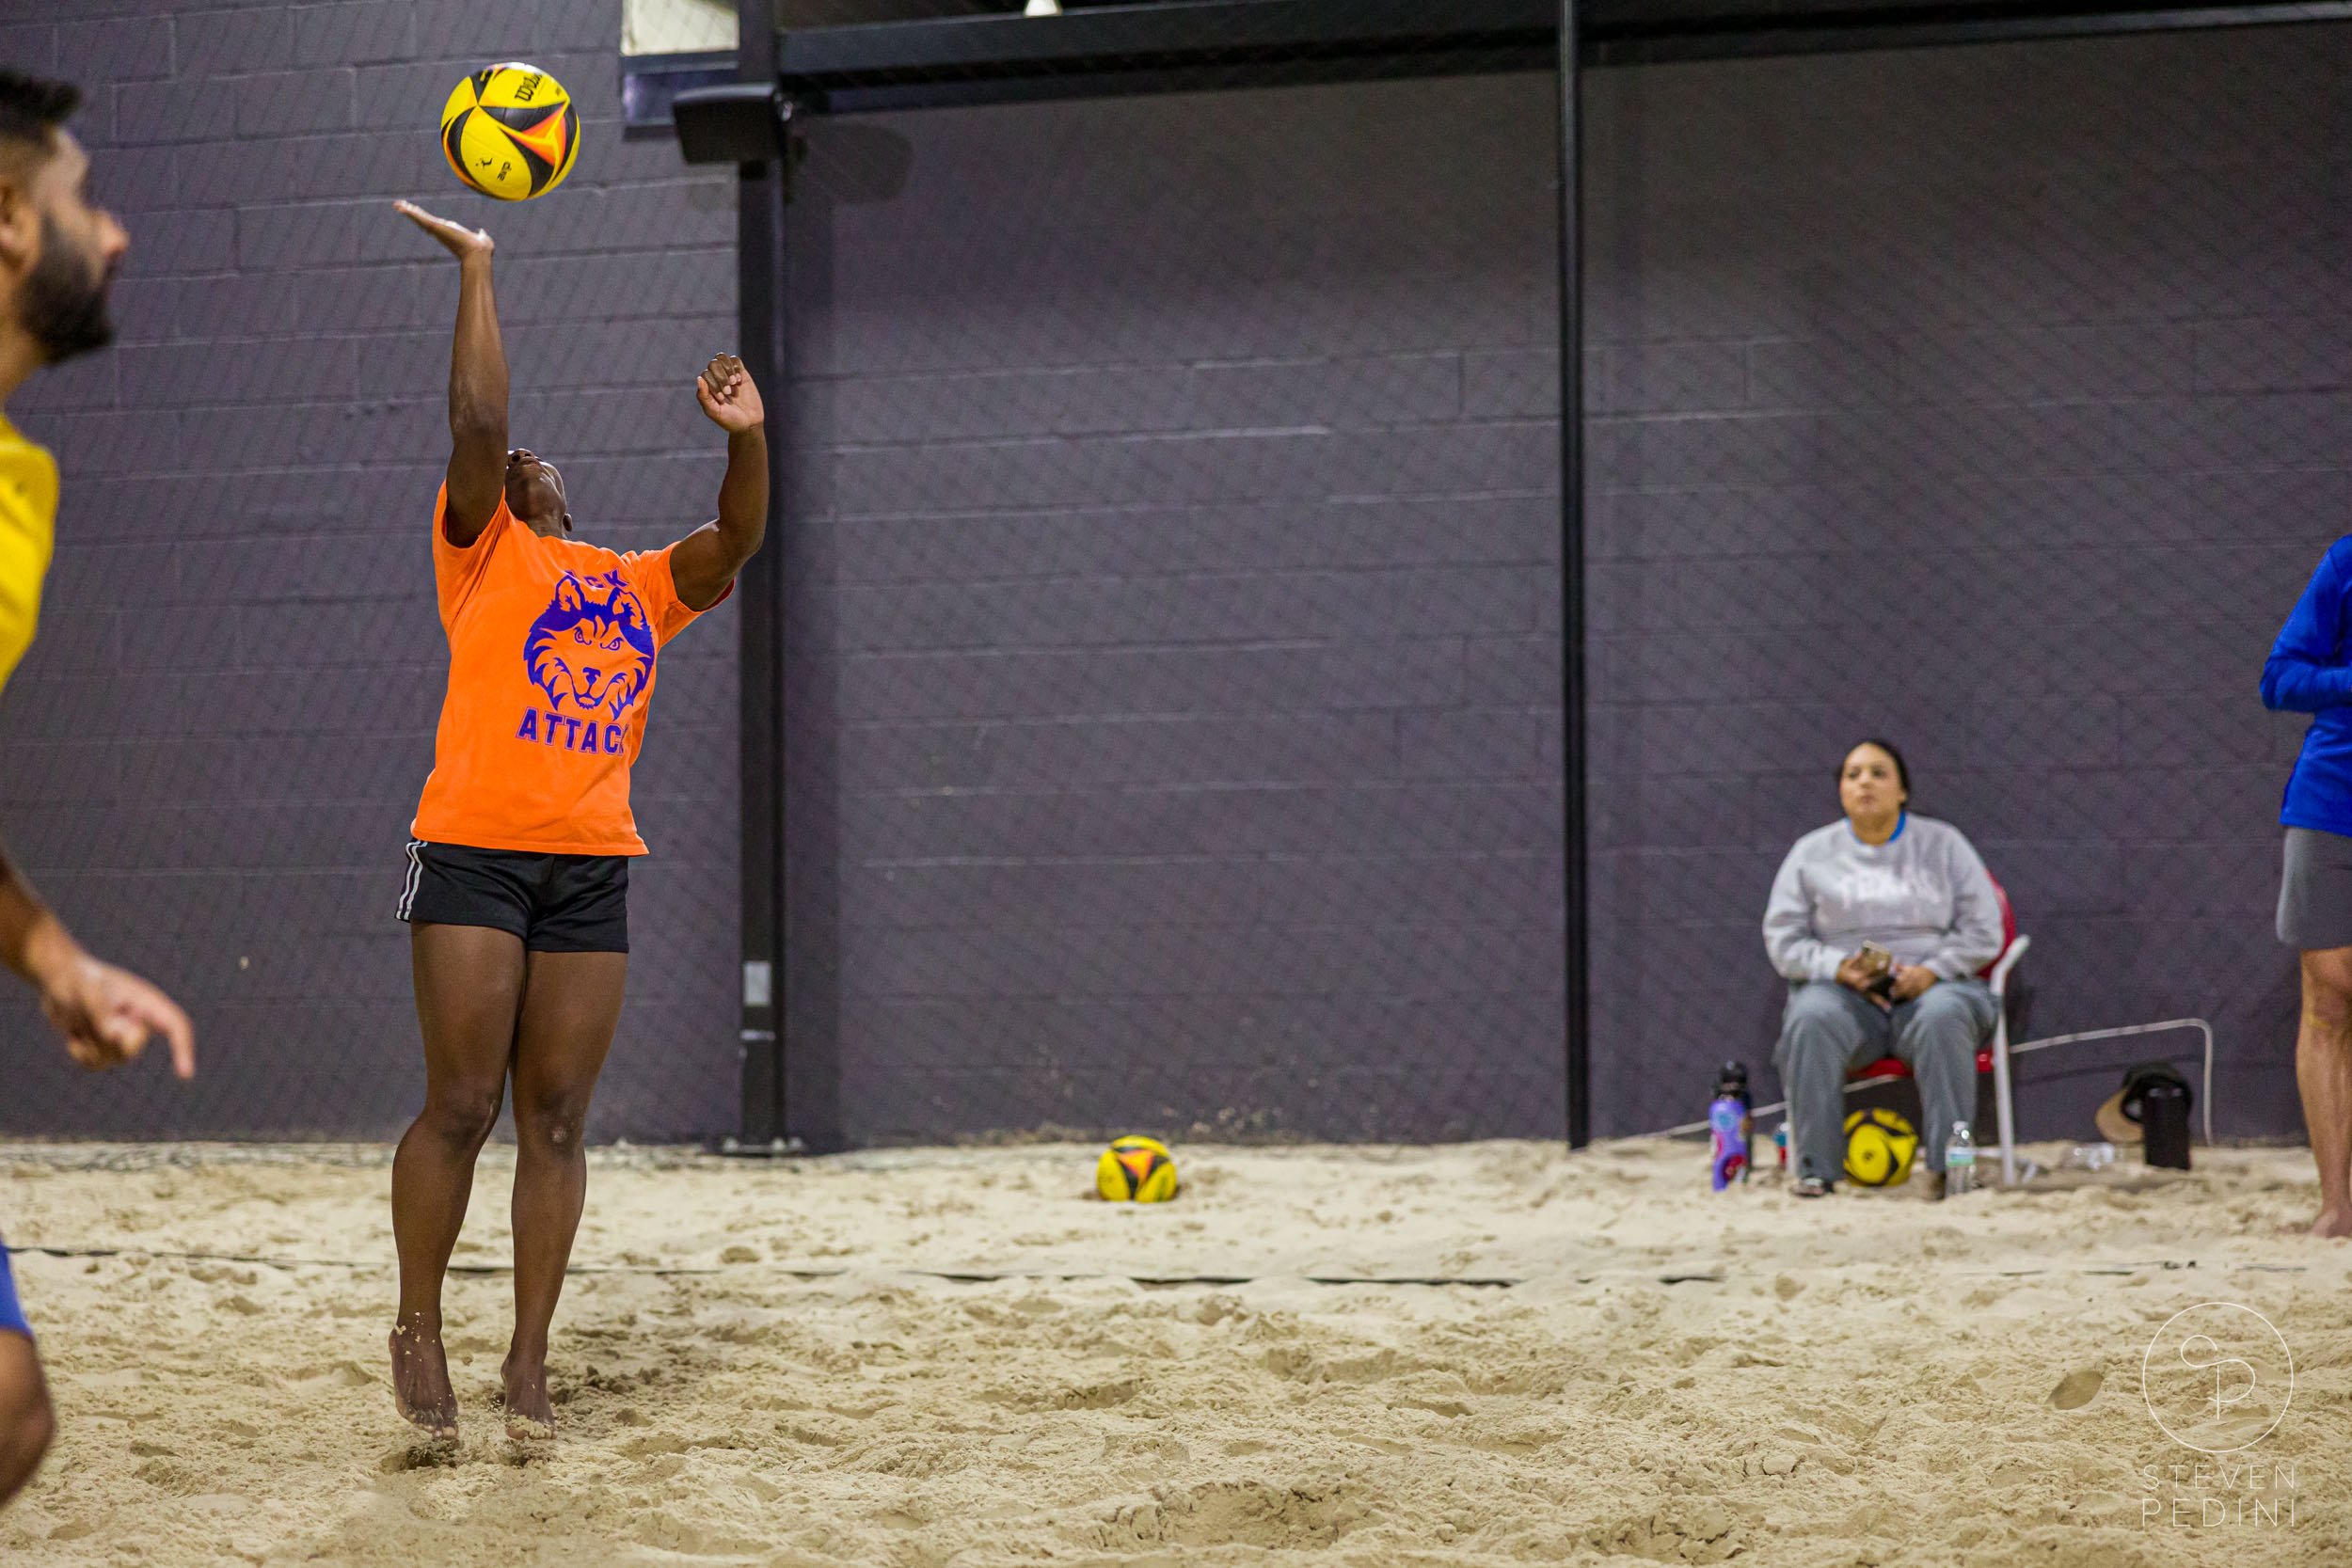 Steven Pedini Photography - Bumpy Pickle - Sand Volleyball - Houston TX - World Cup of Volleyball - 00362.jpg